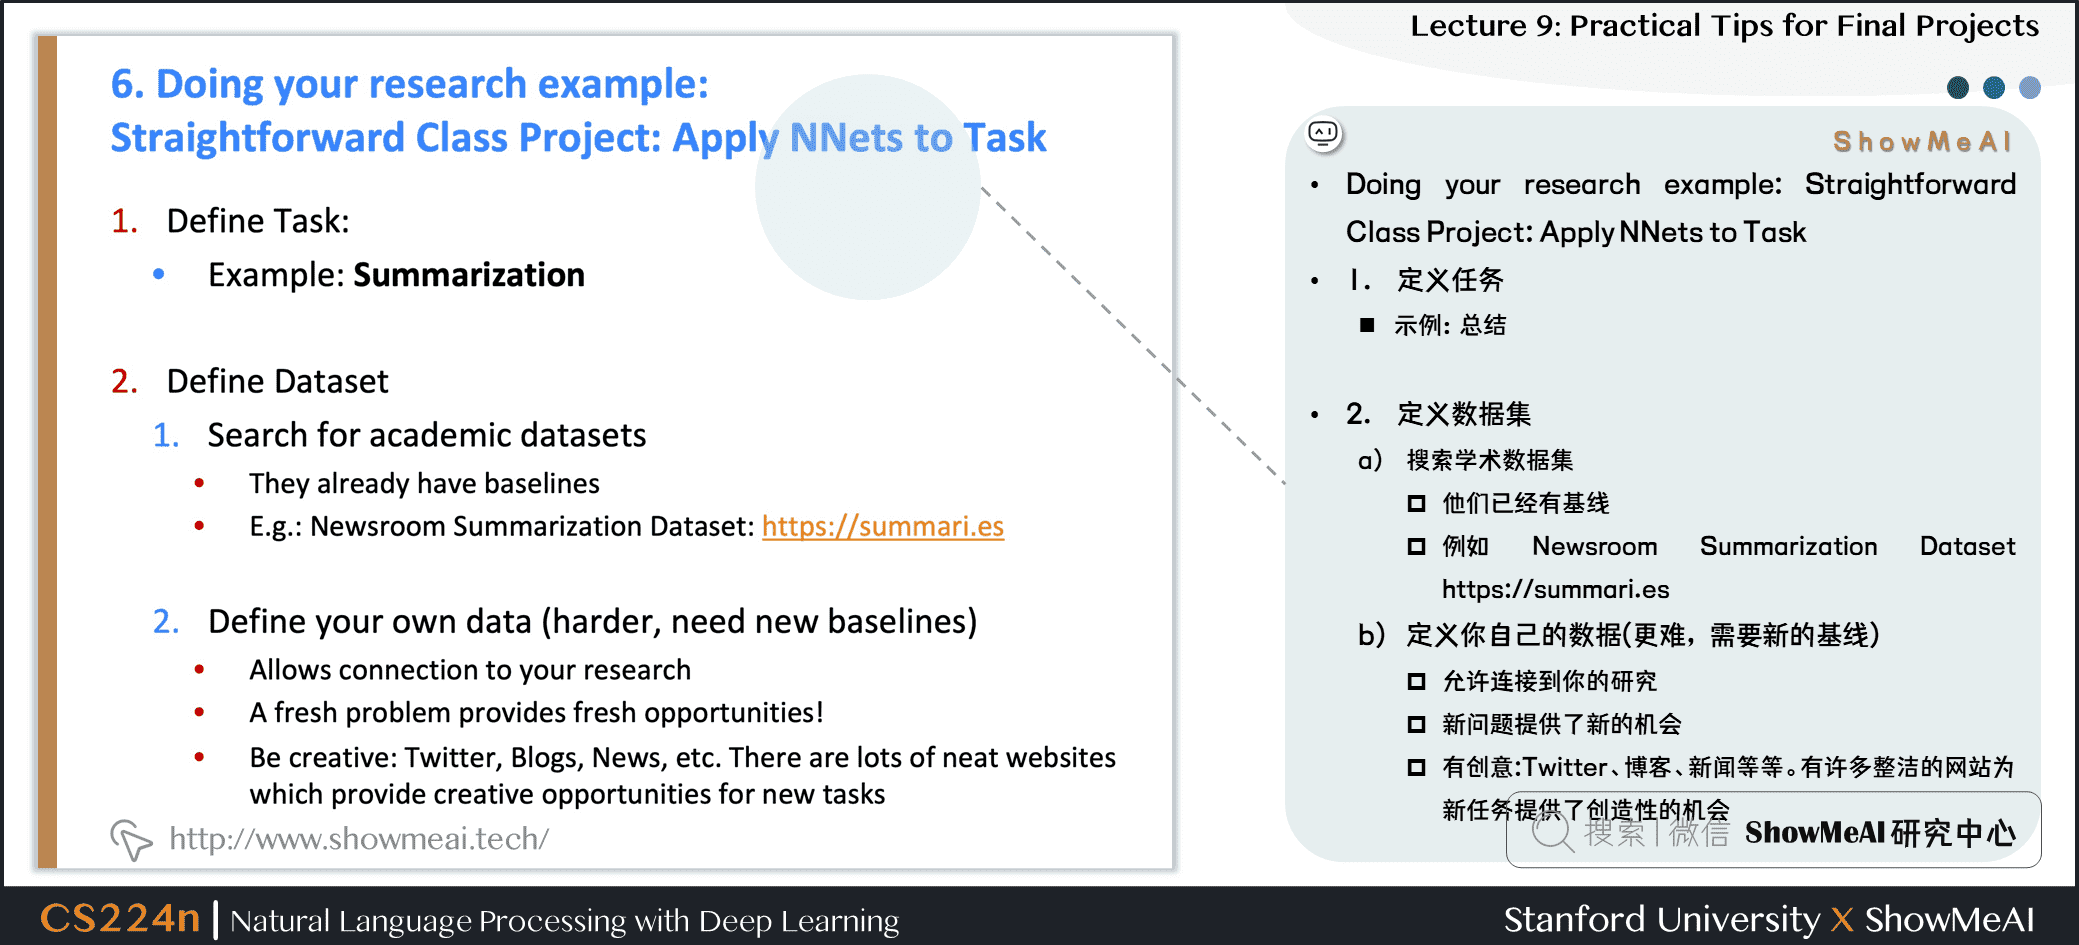 Doing your research example: Straightforward Class Project: Apply NNets to Task